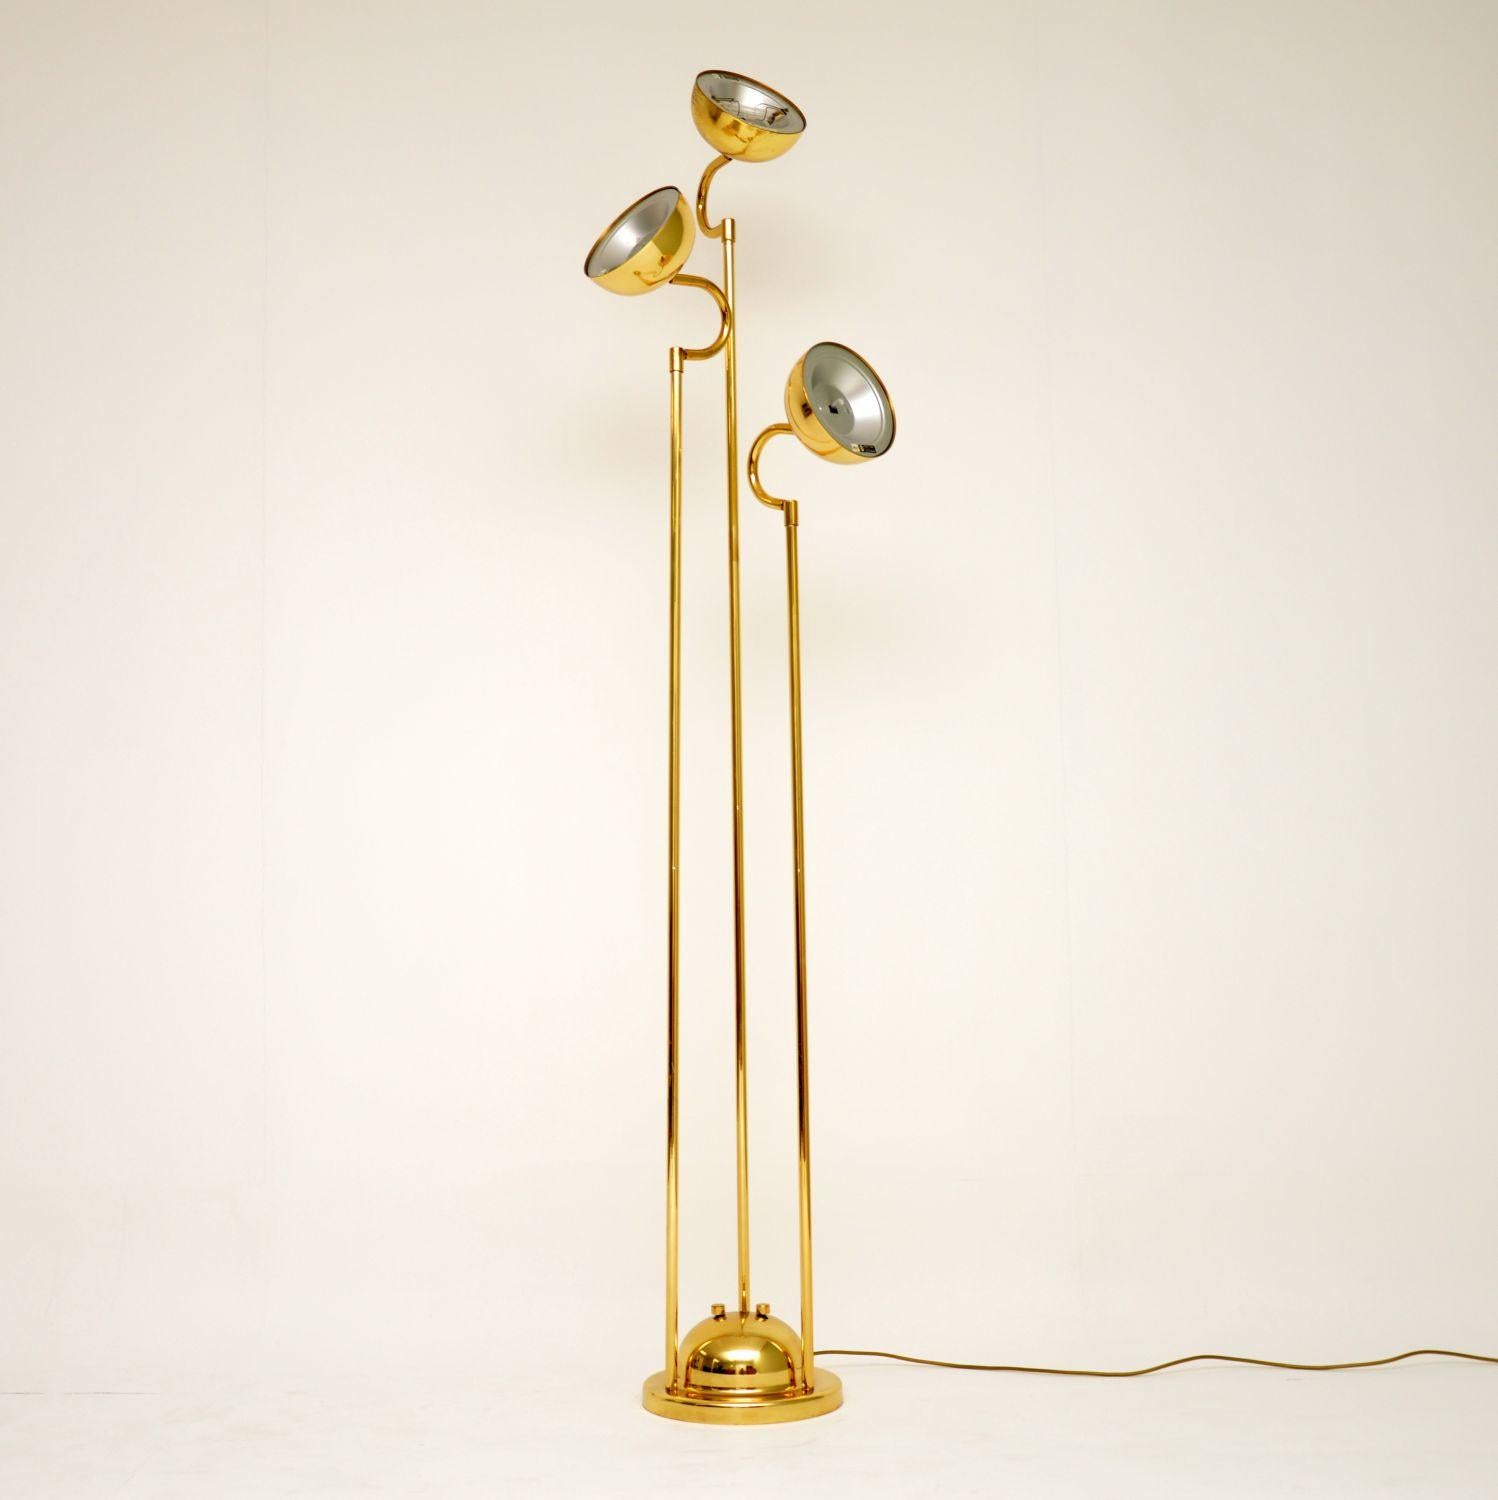 A beautiful vintage Italian brass floor lamp, this dates from circa 1970s-1980s. It has three independent heads that all tilt and swivel, the condition is great throughout, with only some extremely minor surface wear. This is in good working order,